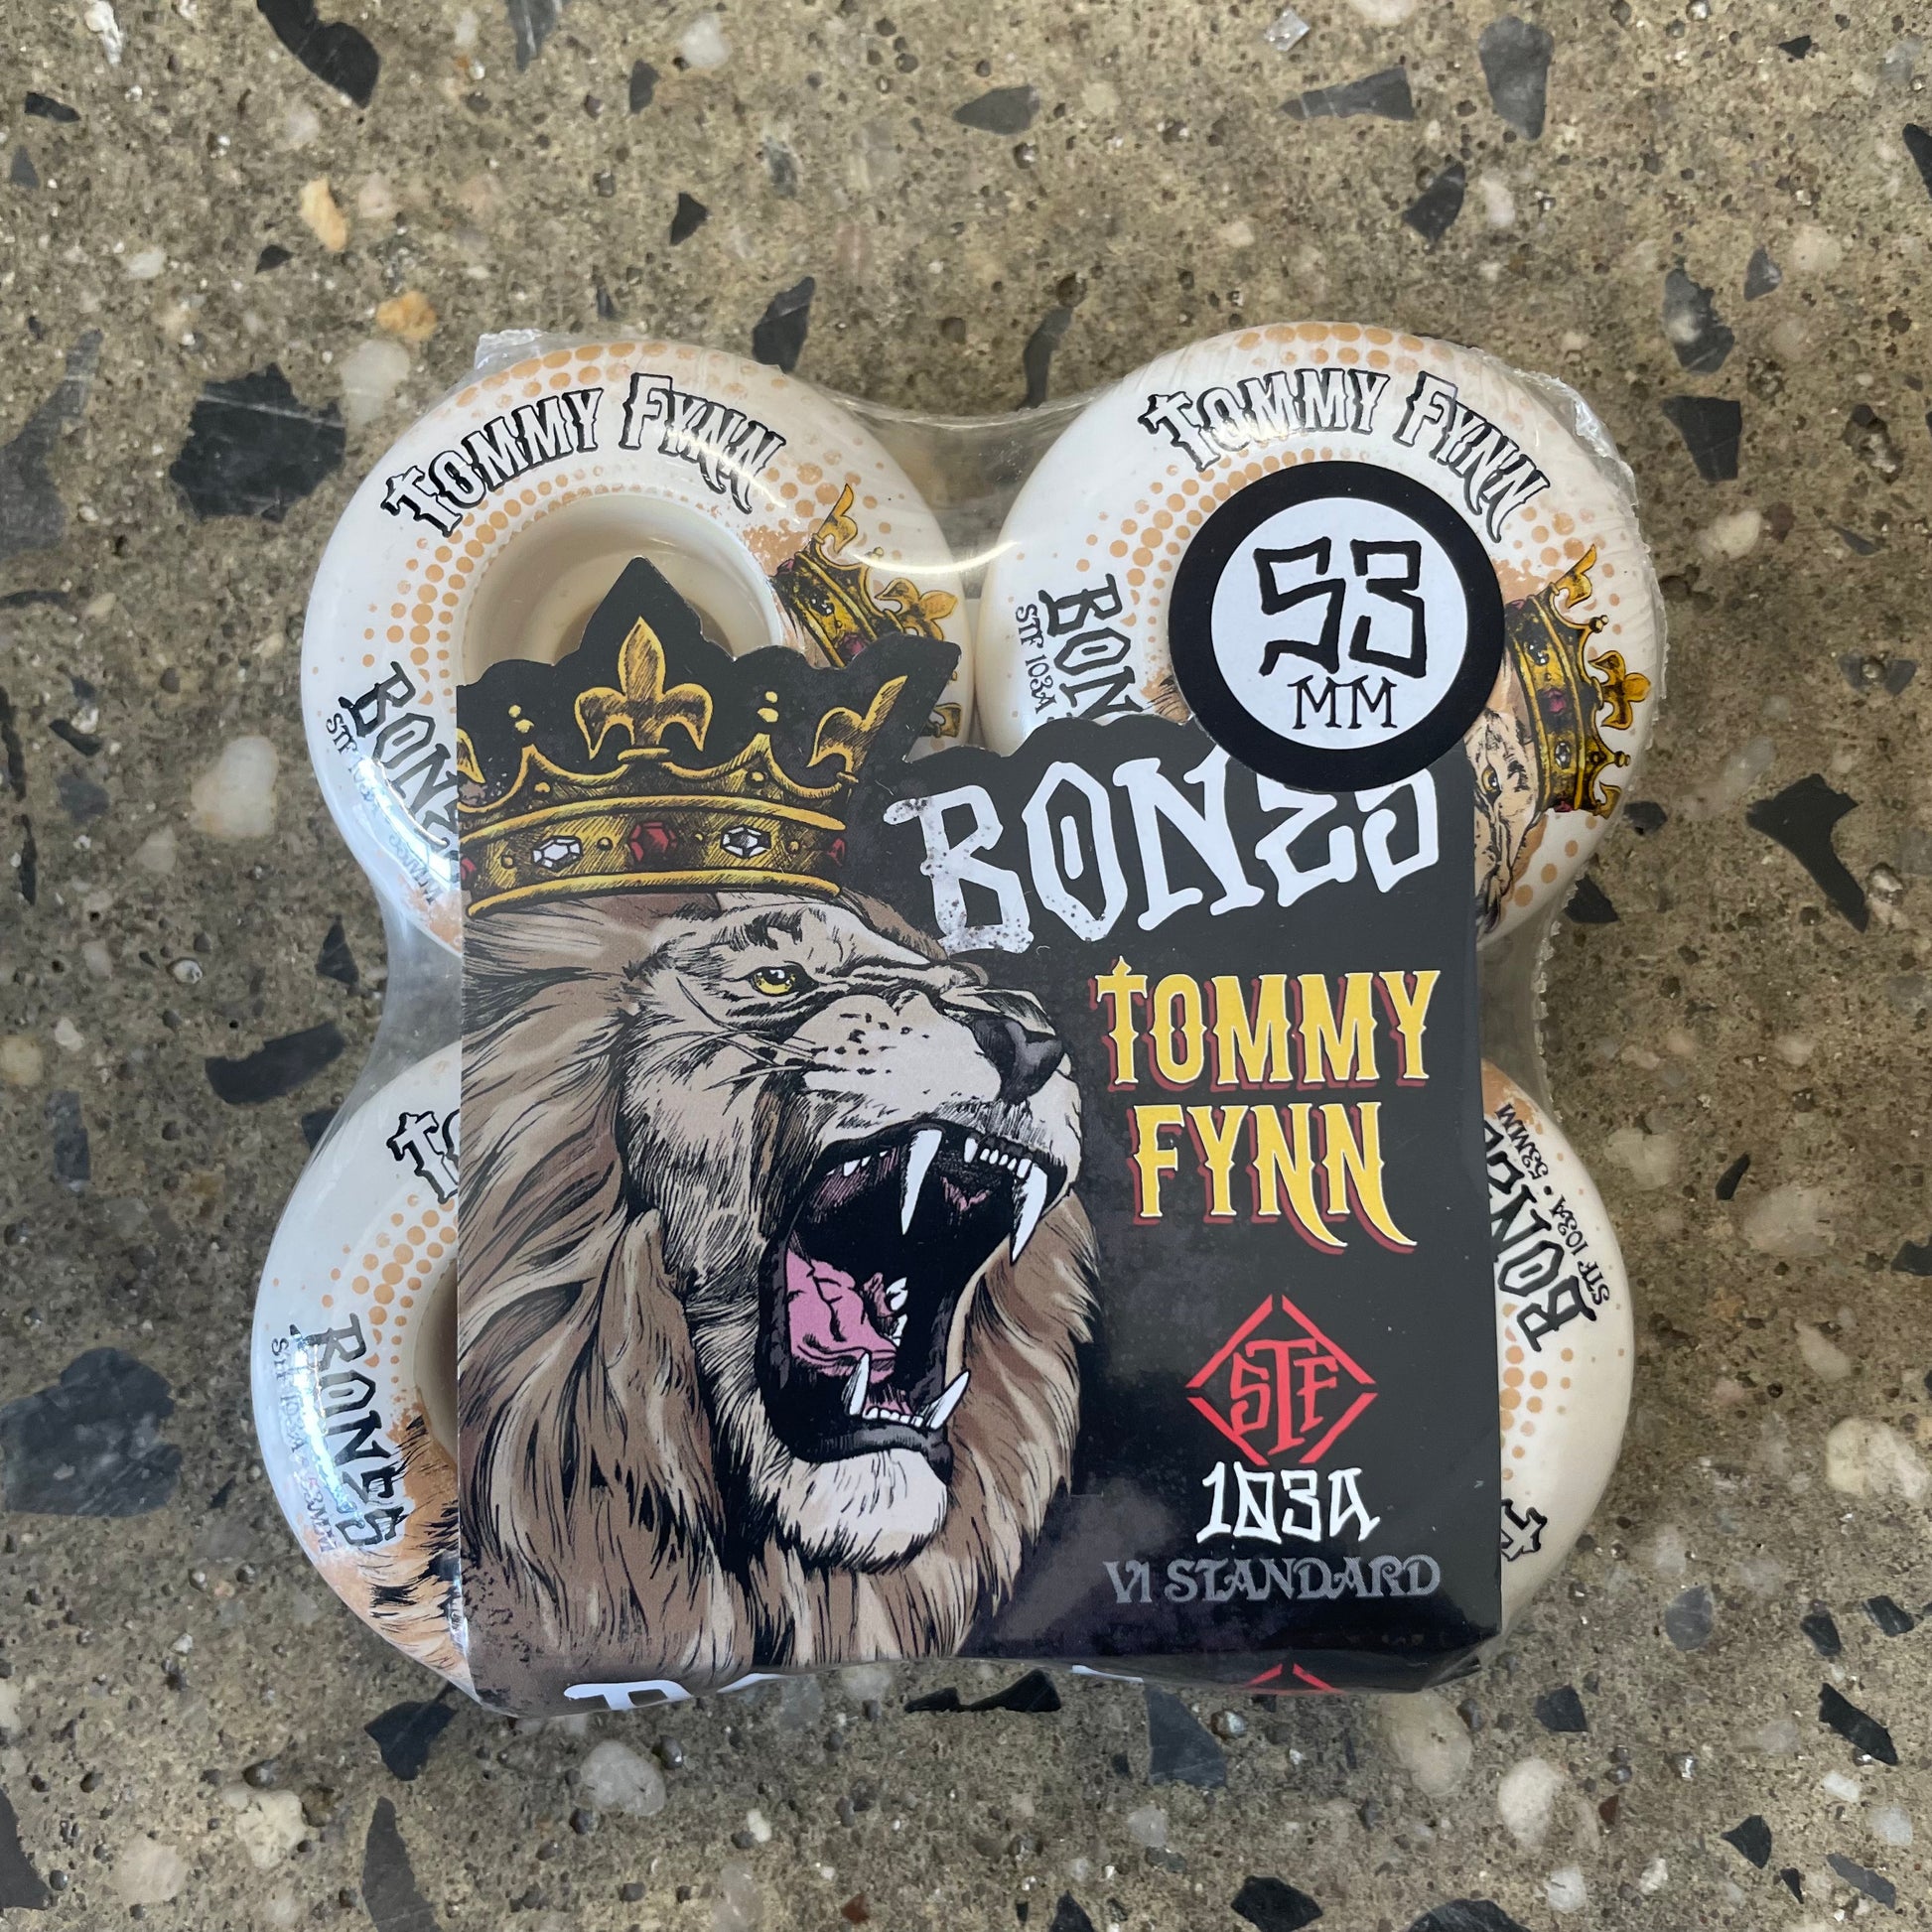 Lion with crown logo on wheel